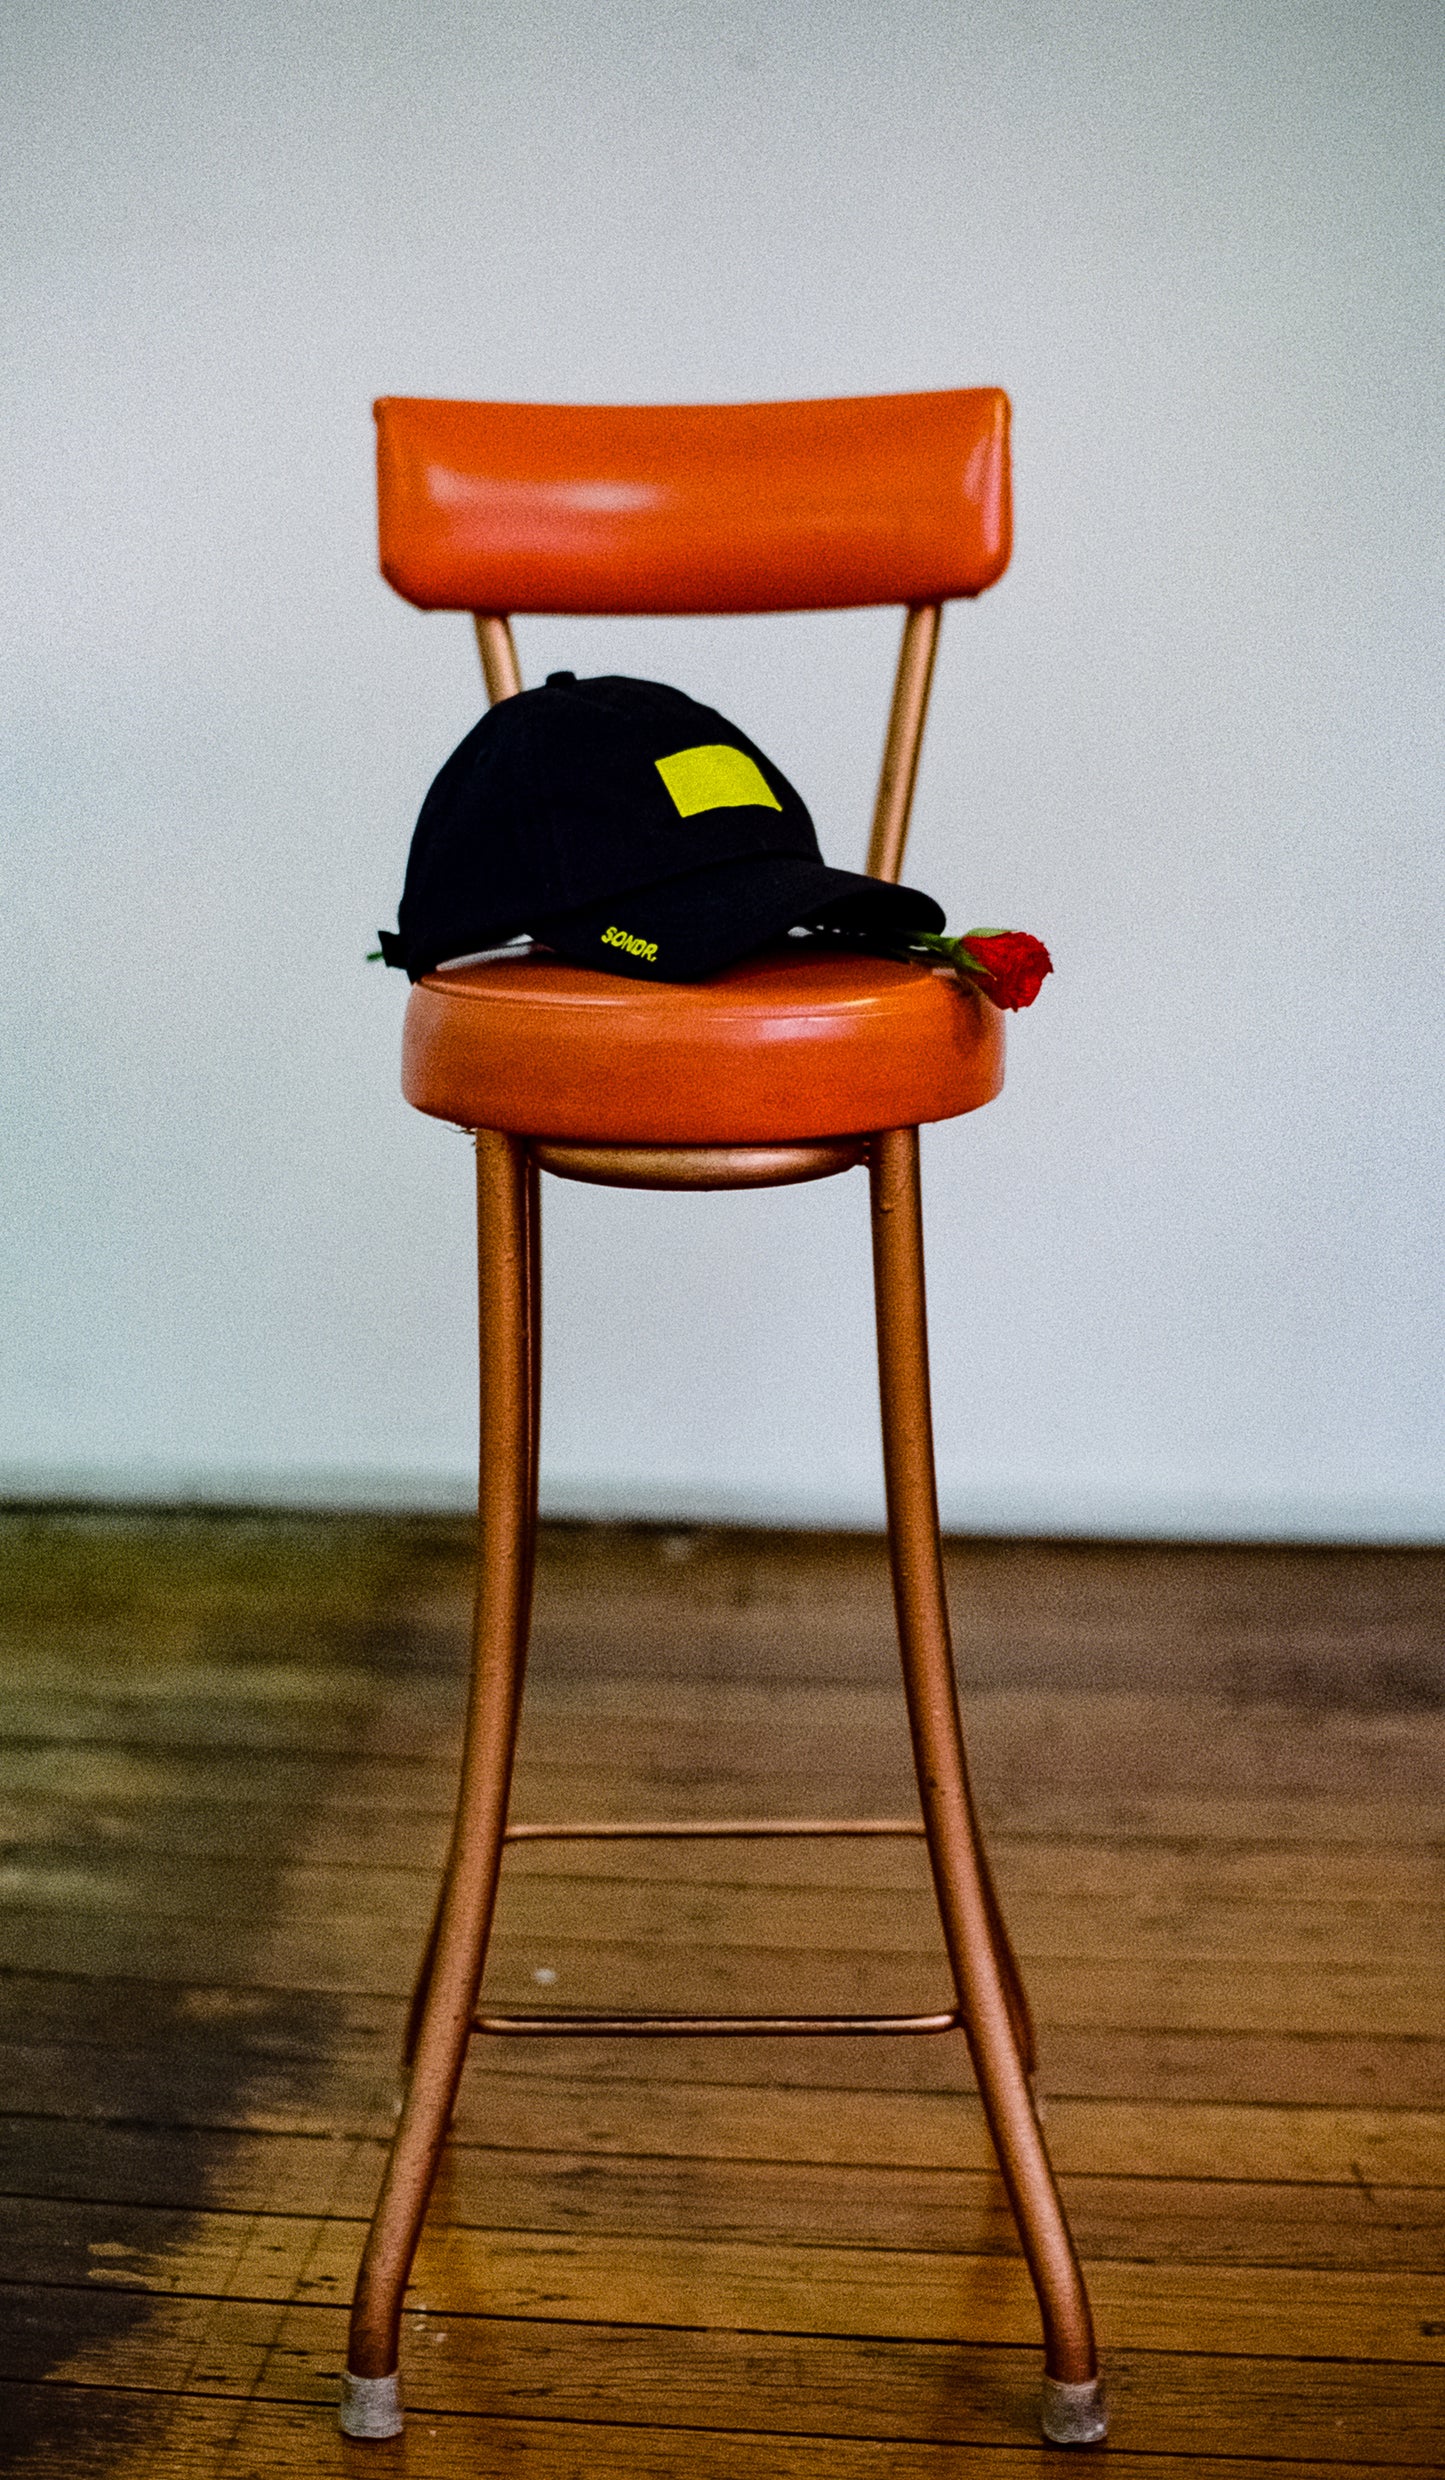 Vintage burnt orange bar stool in a room alone with black SONDR. Obscure Sorrows Dad Hat & single rose on the seat